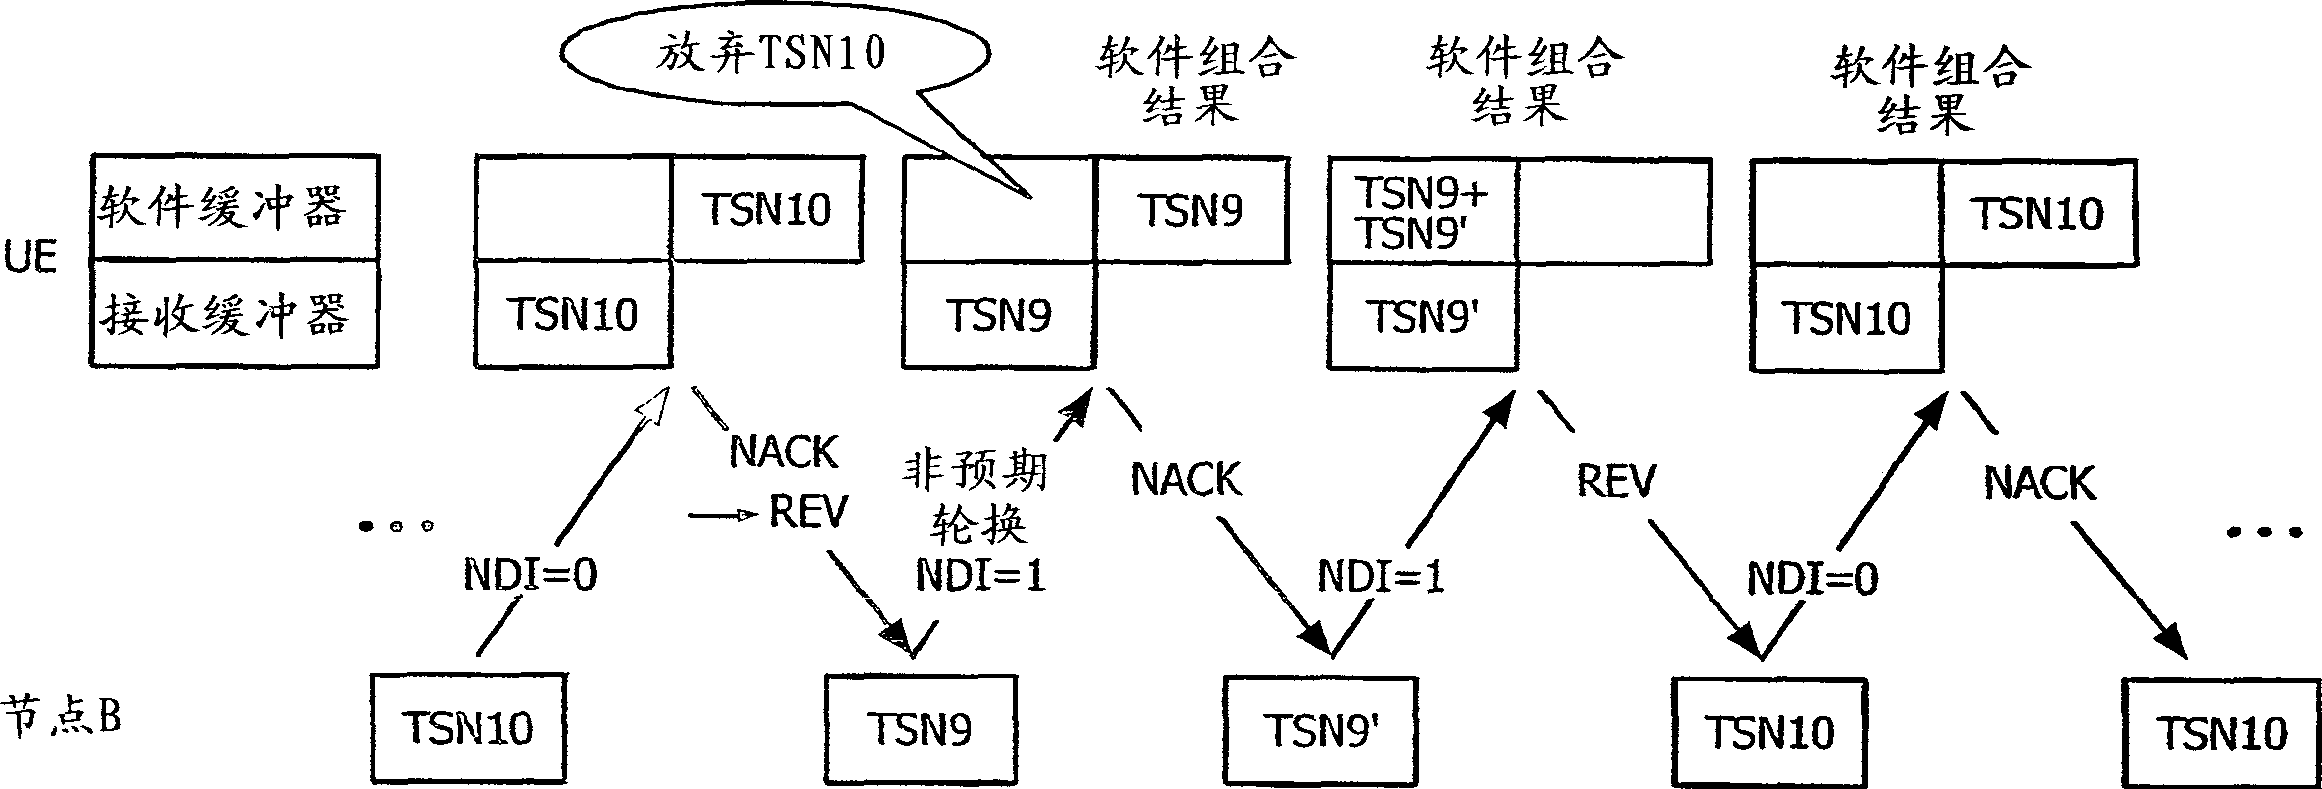 Transmission of data packets from a transmitter to a receiver